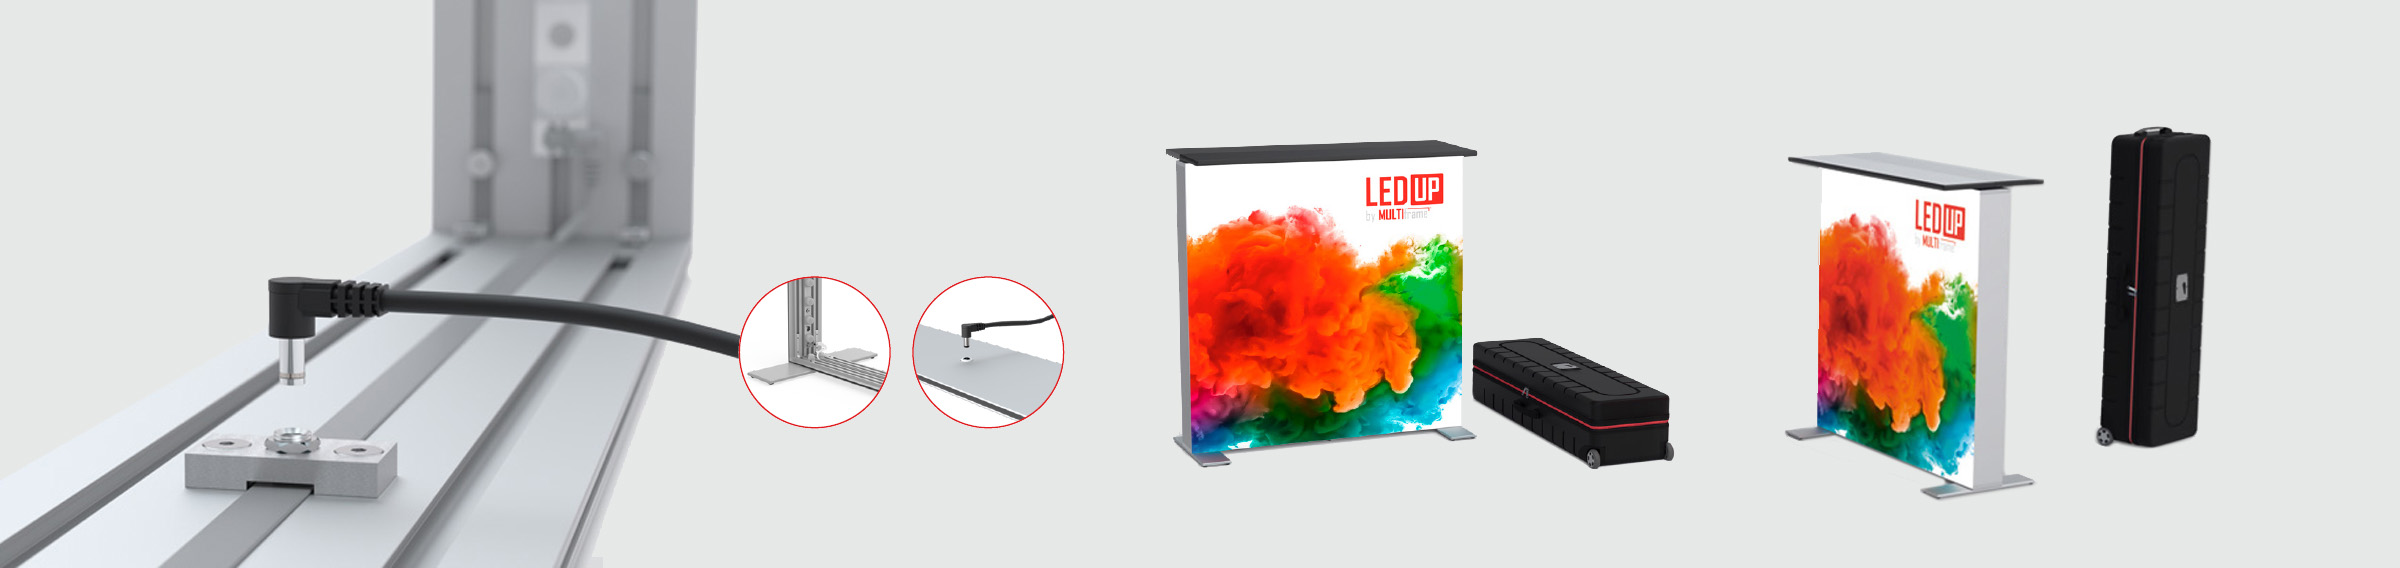 LED UP - COUNTER